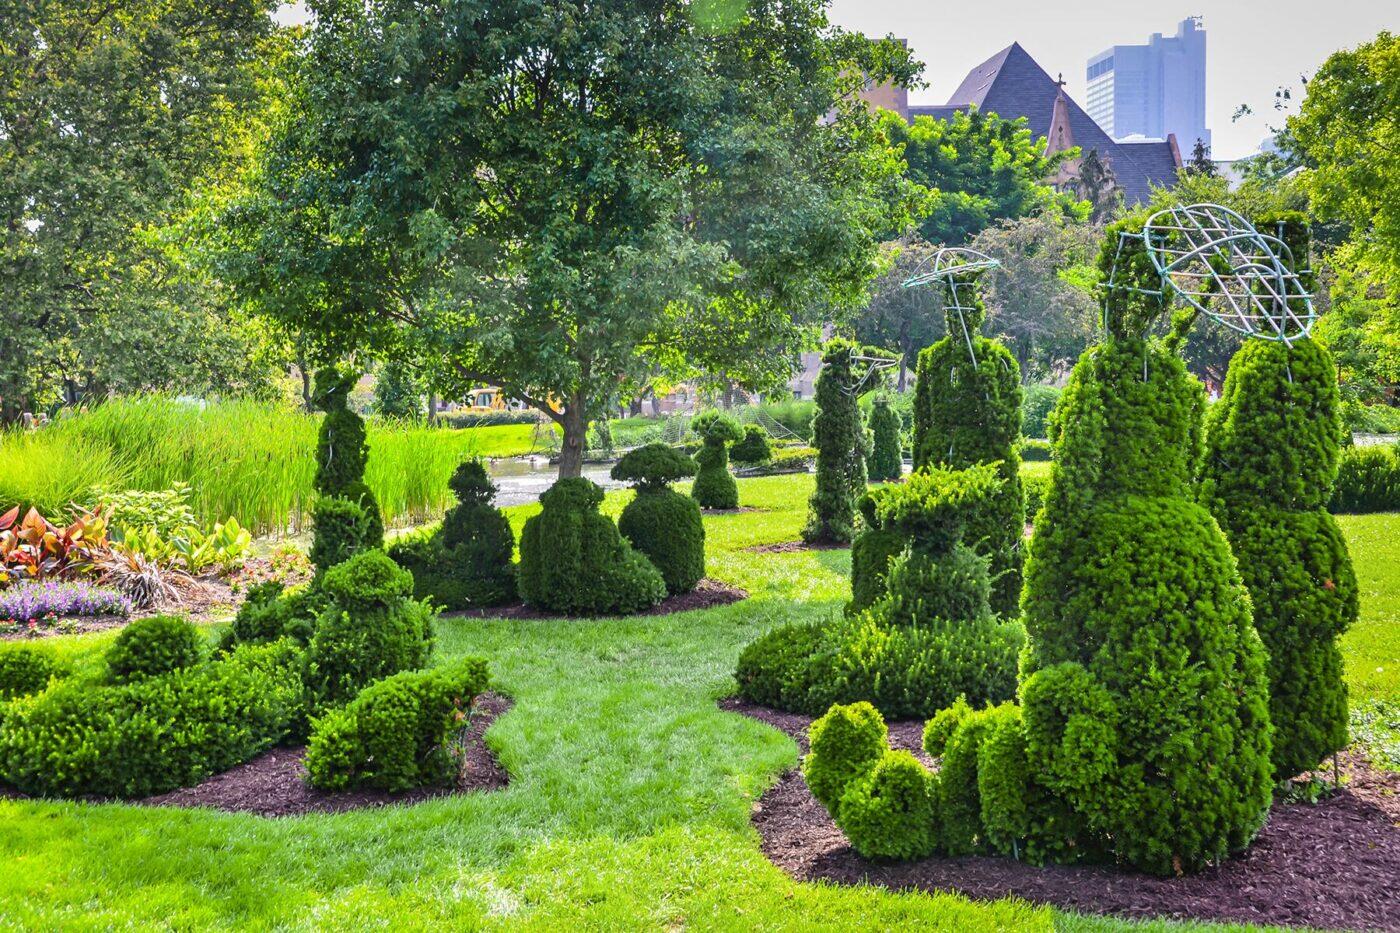 The Most Incredible Gardens in the World